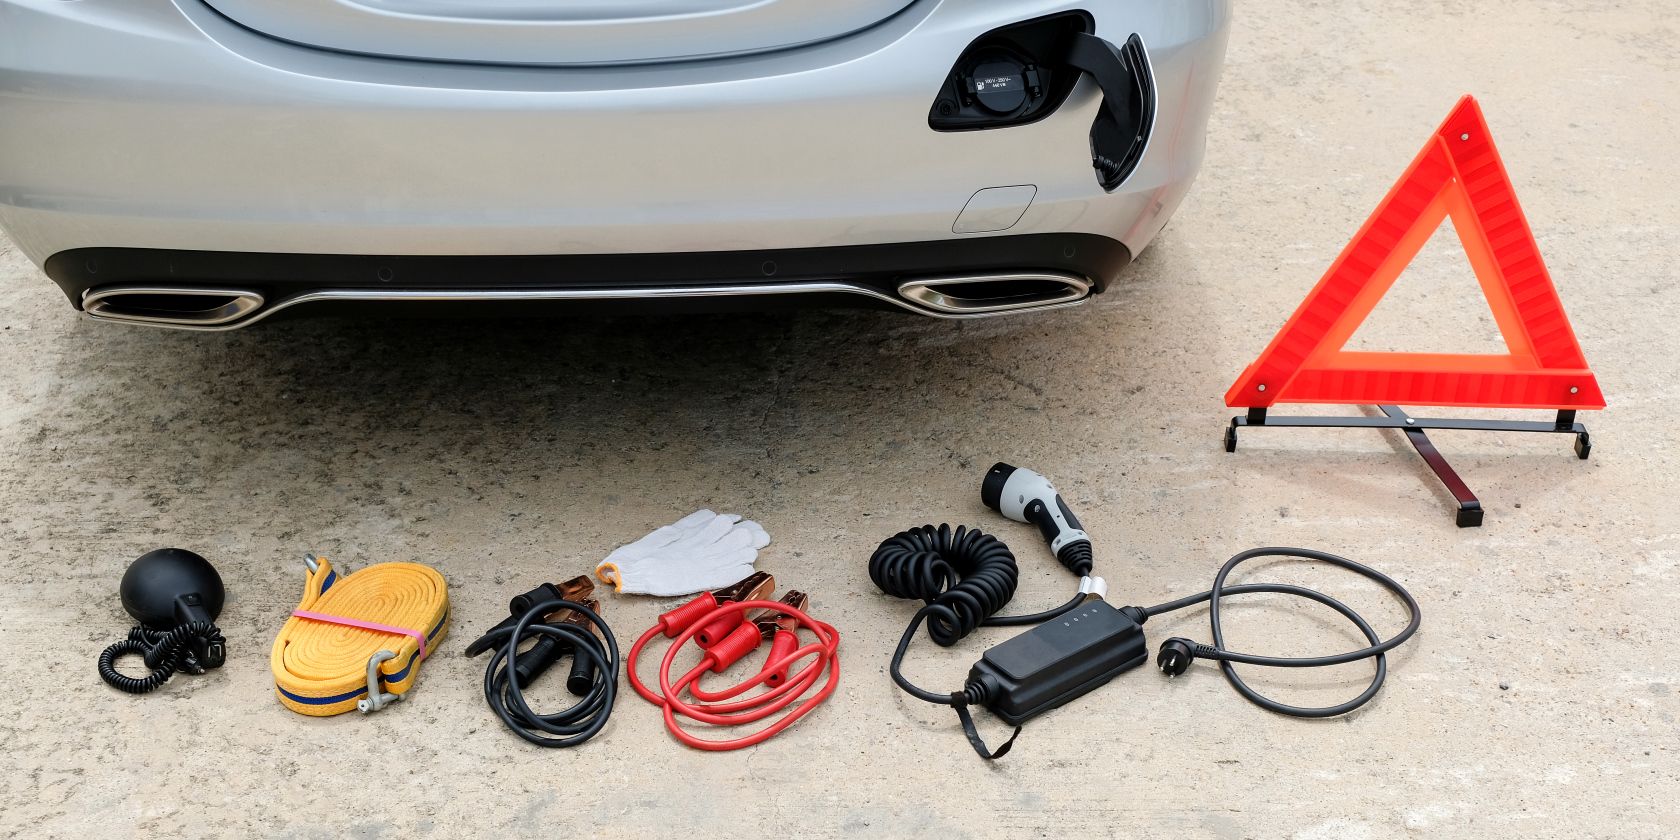 electric vehicle broken down with red triangle and charging cable feature